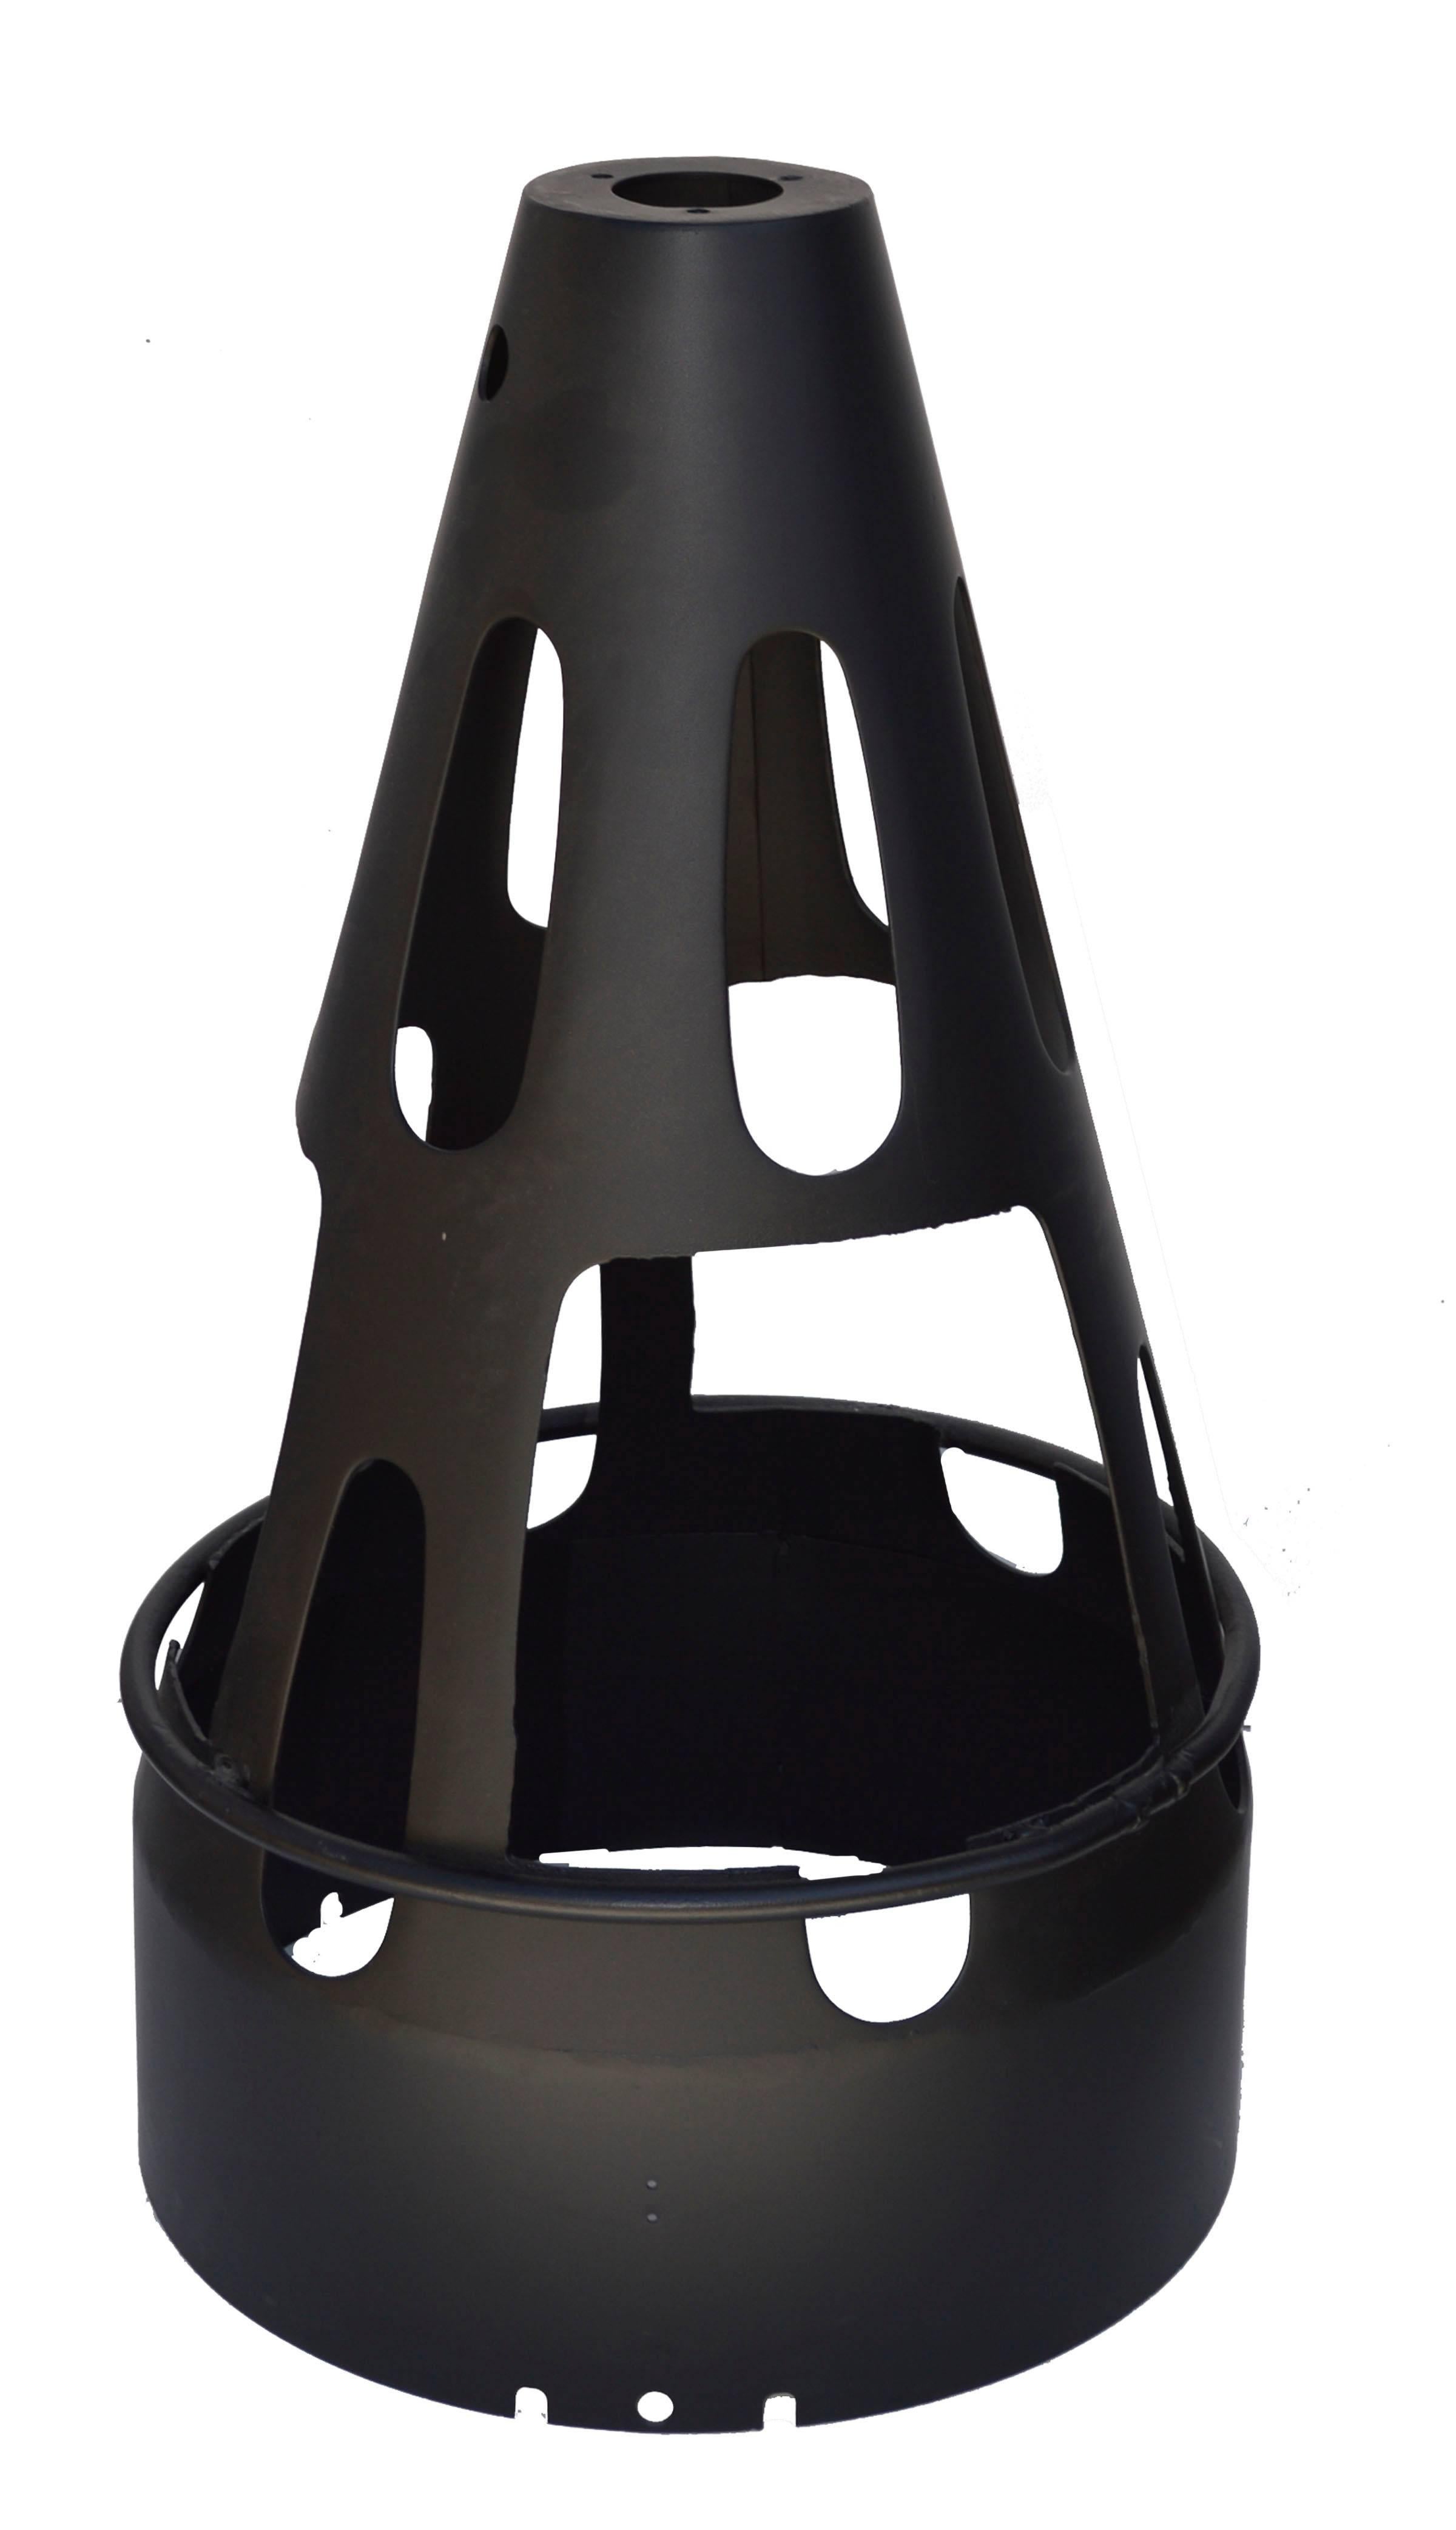 Thoroughly unique missile cone stools are wonderful example of upcycling, turning guns into plowshares providing an awesome Industrial or man cave design element. Honestly, how many people can say they have missile cones in their homes or office?